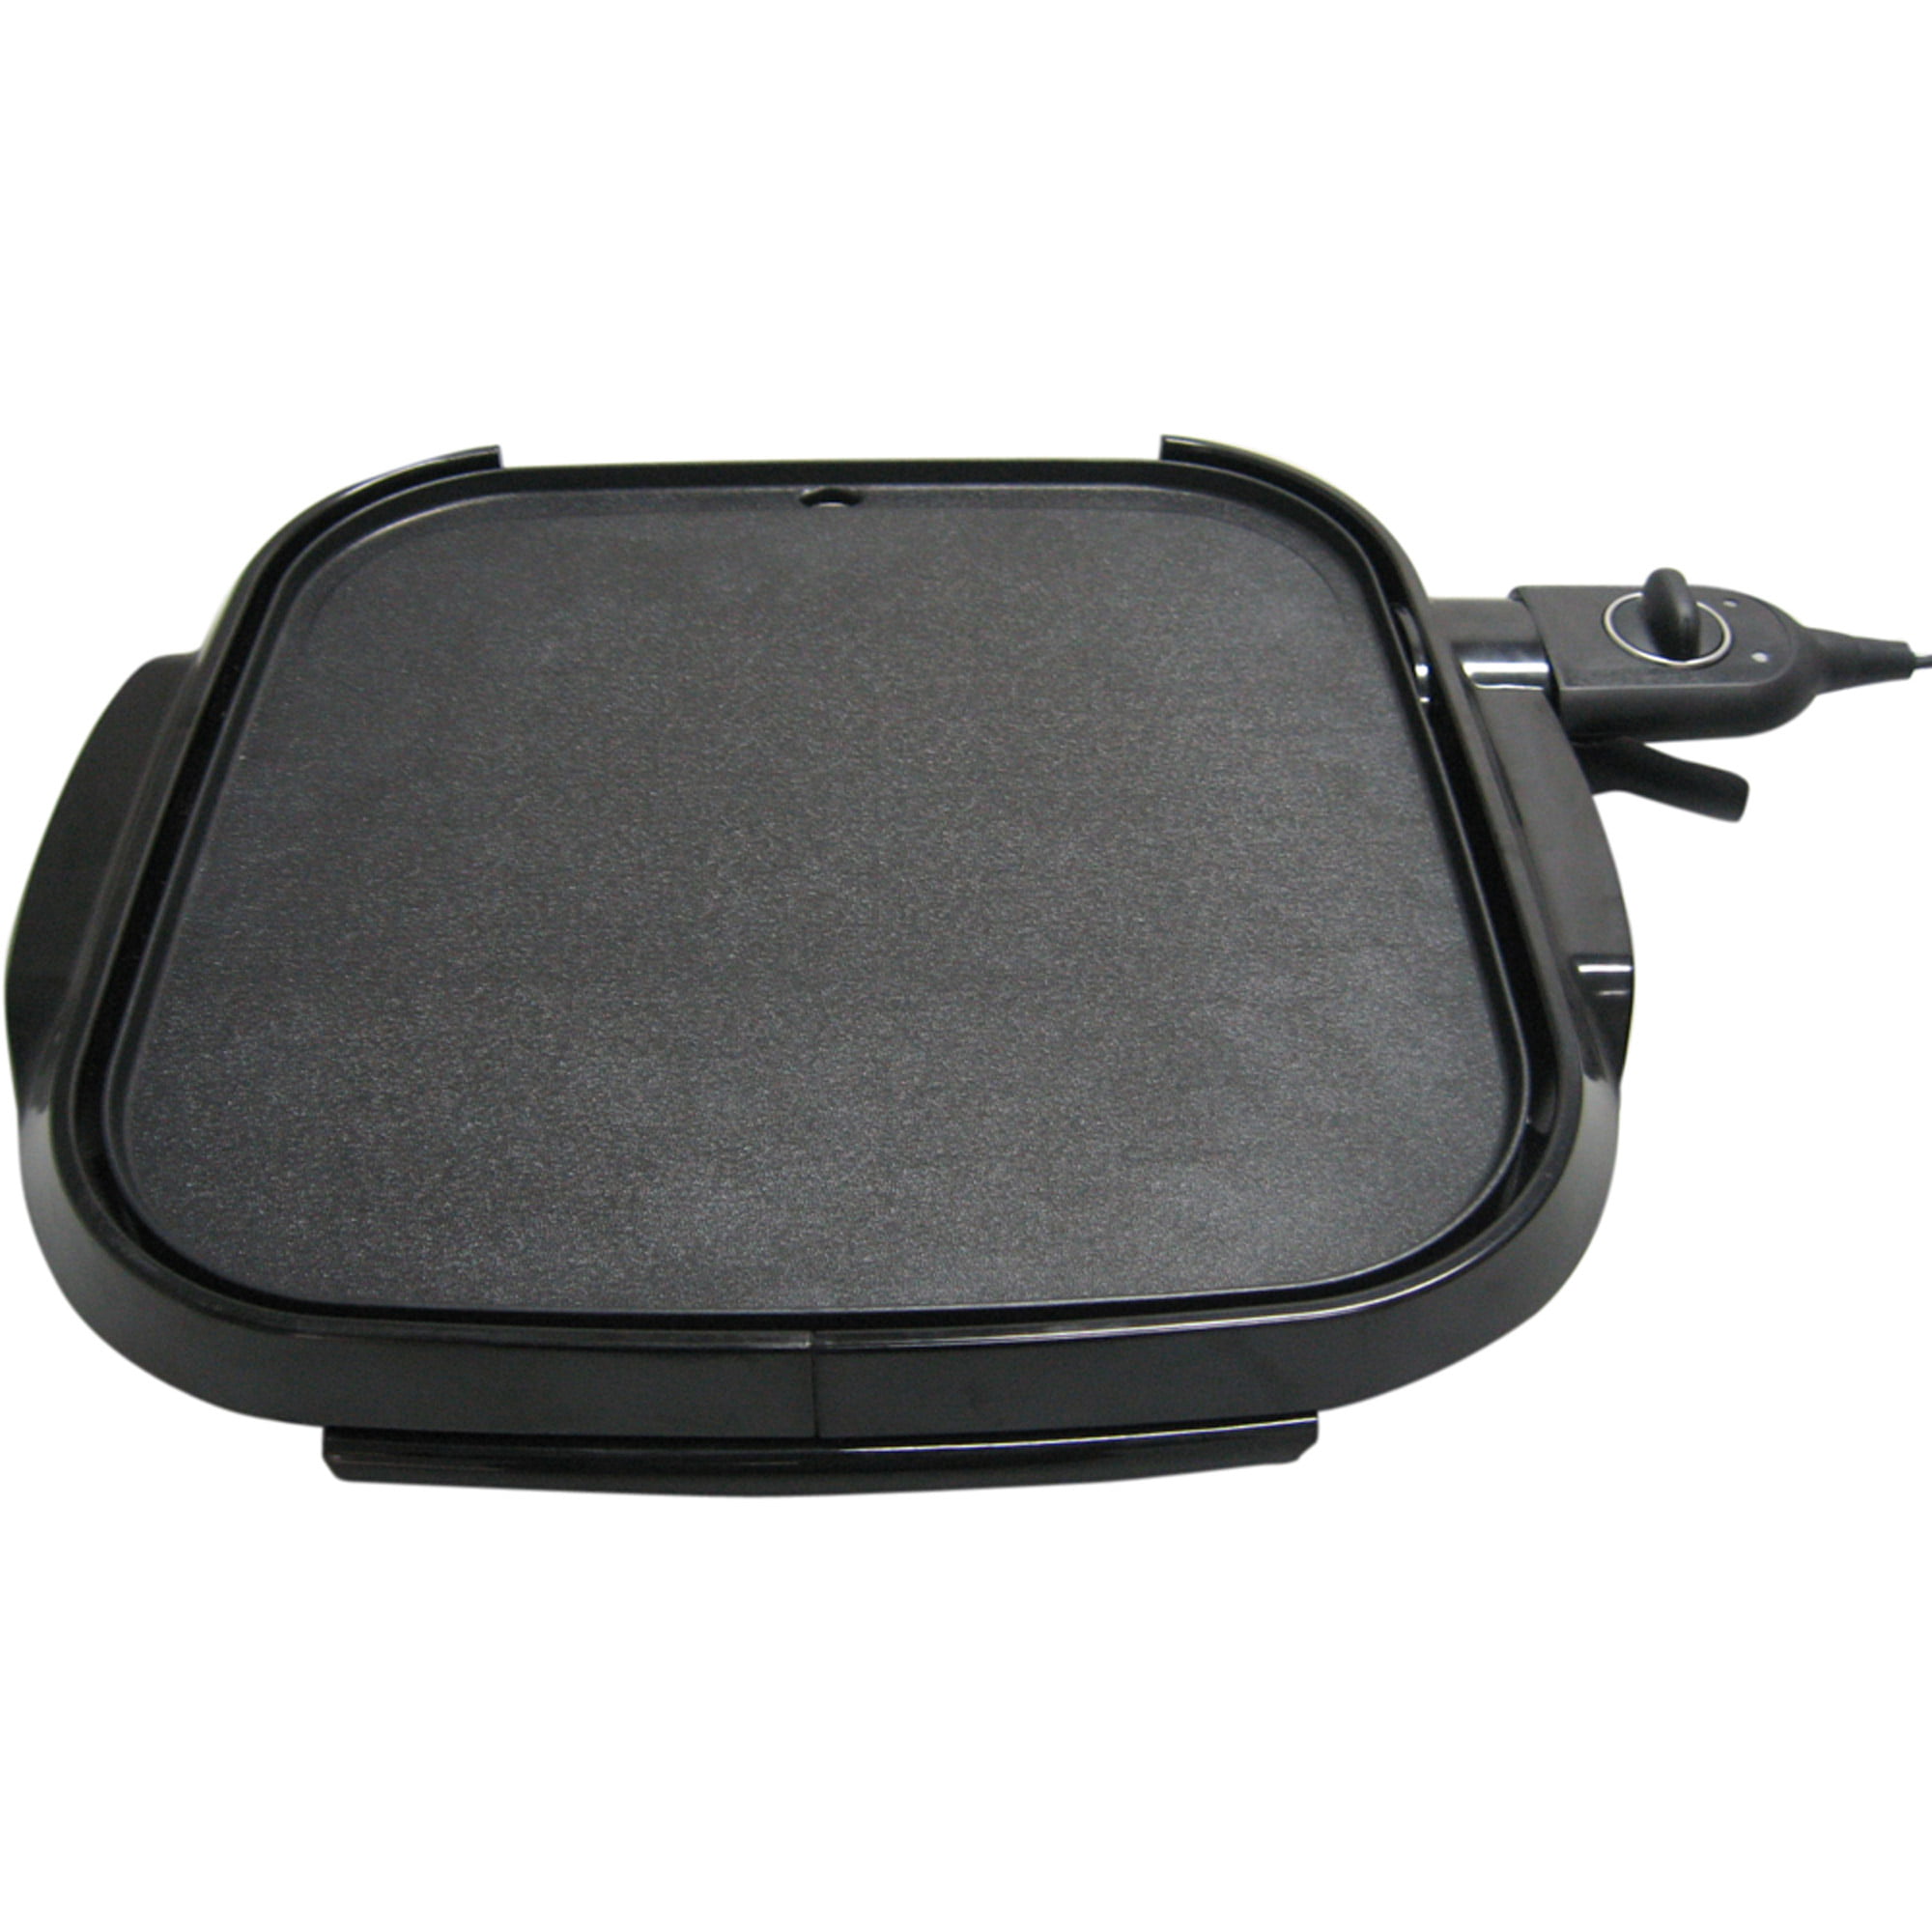 Farberware Royalty 3-in-1 Black Skillet, Grill & Griddle Cooking System 